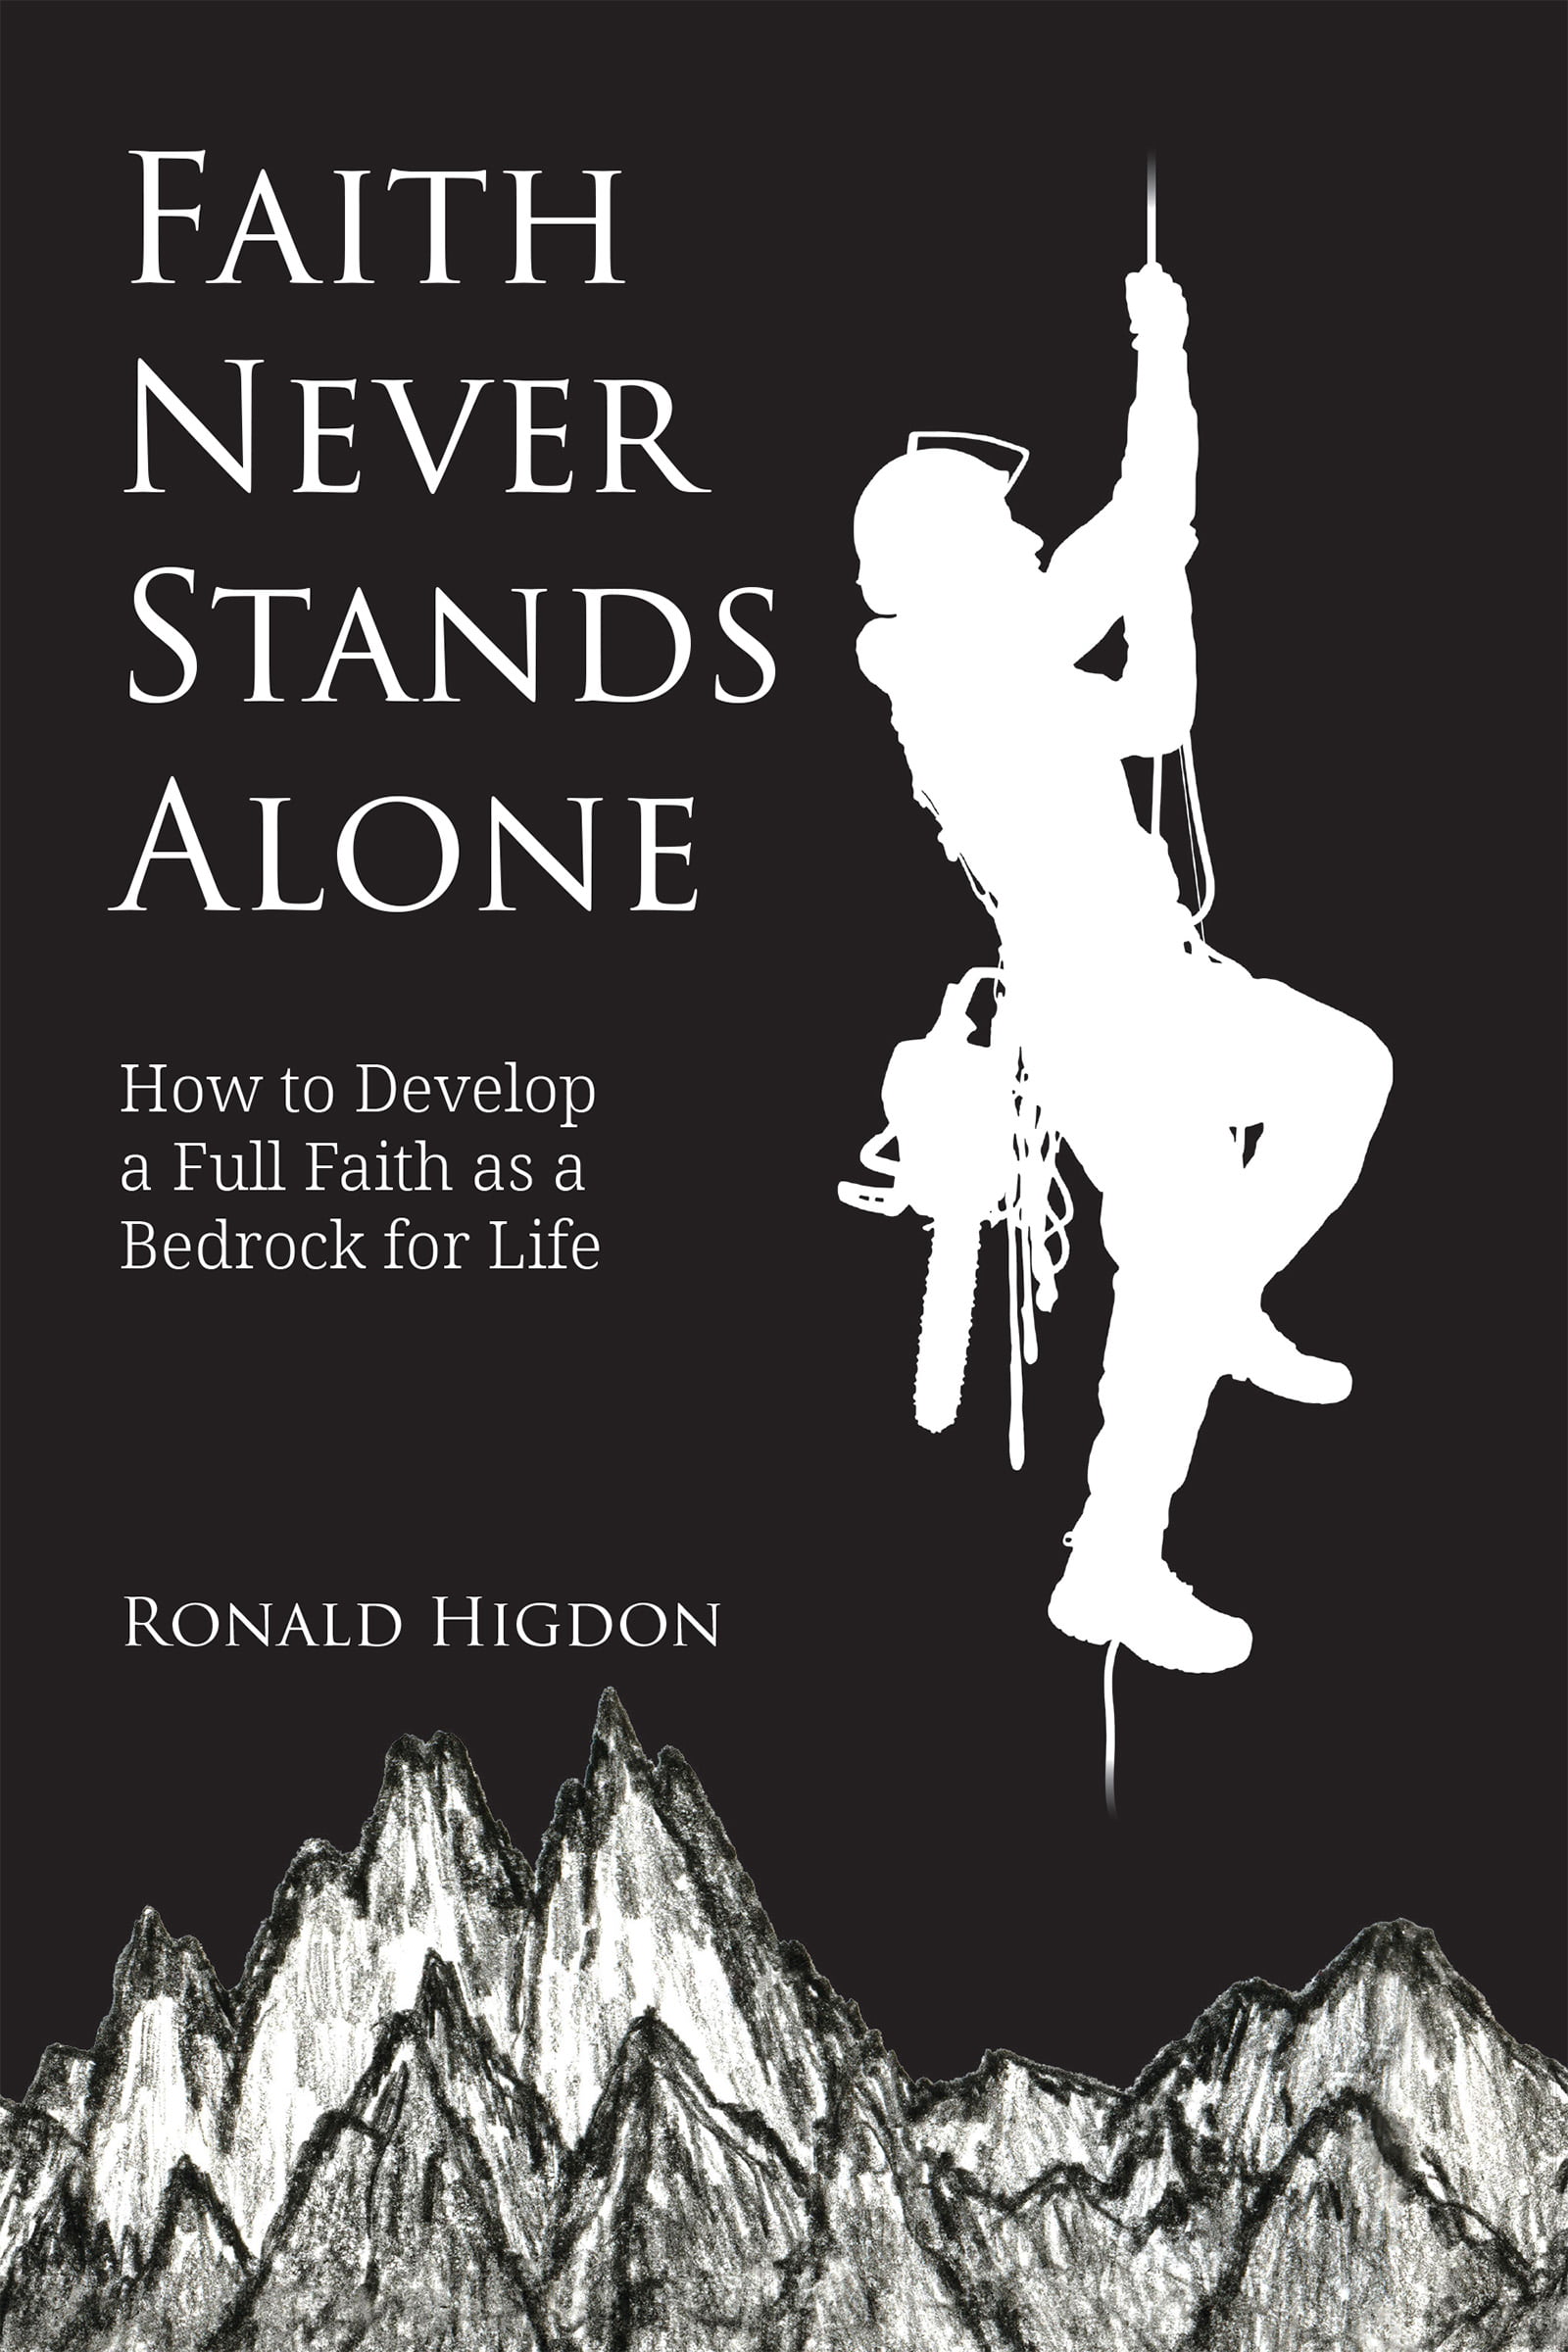 Faith Never Stands Alone by Ronald Higdon